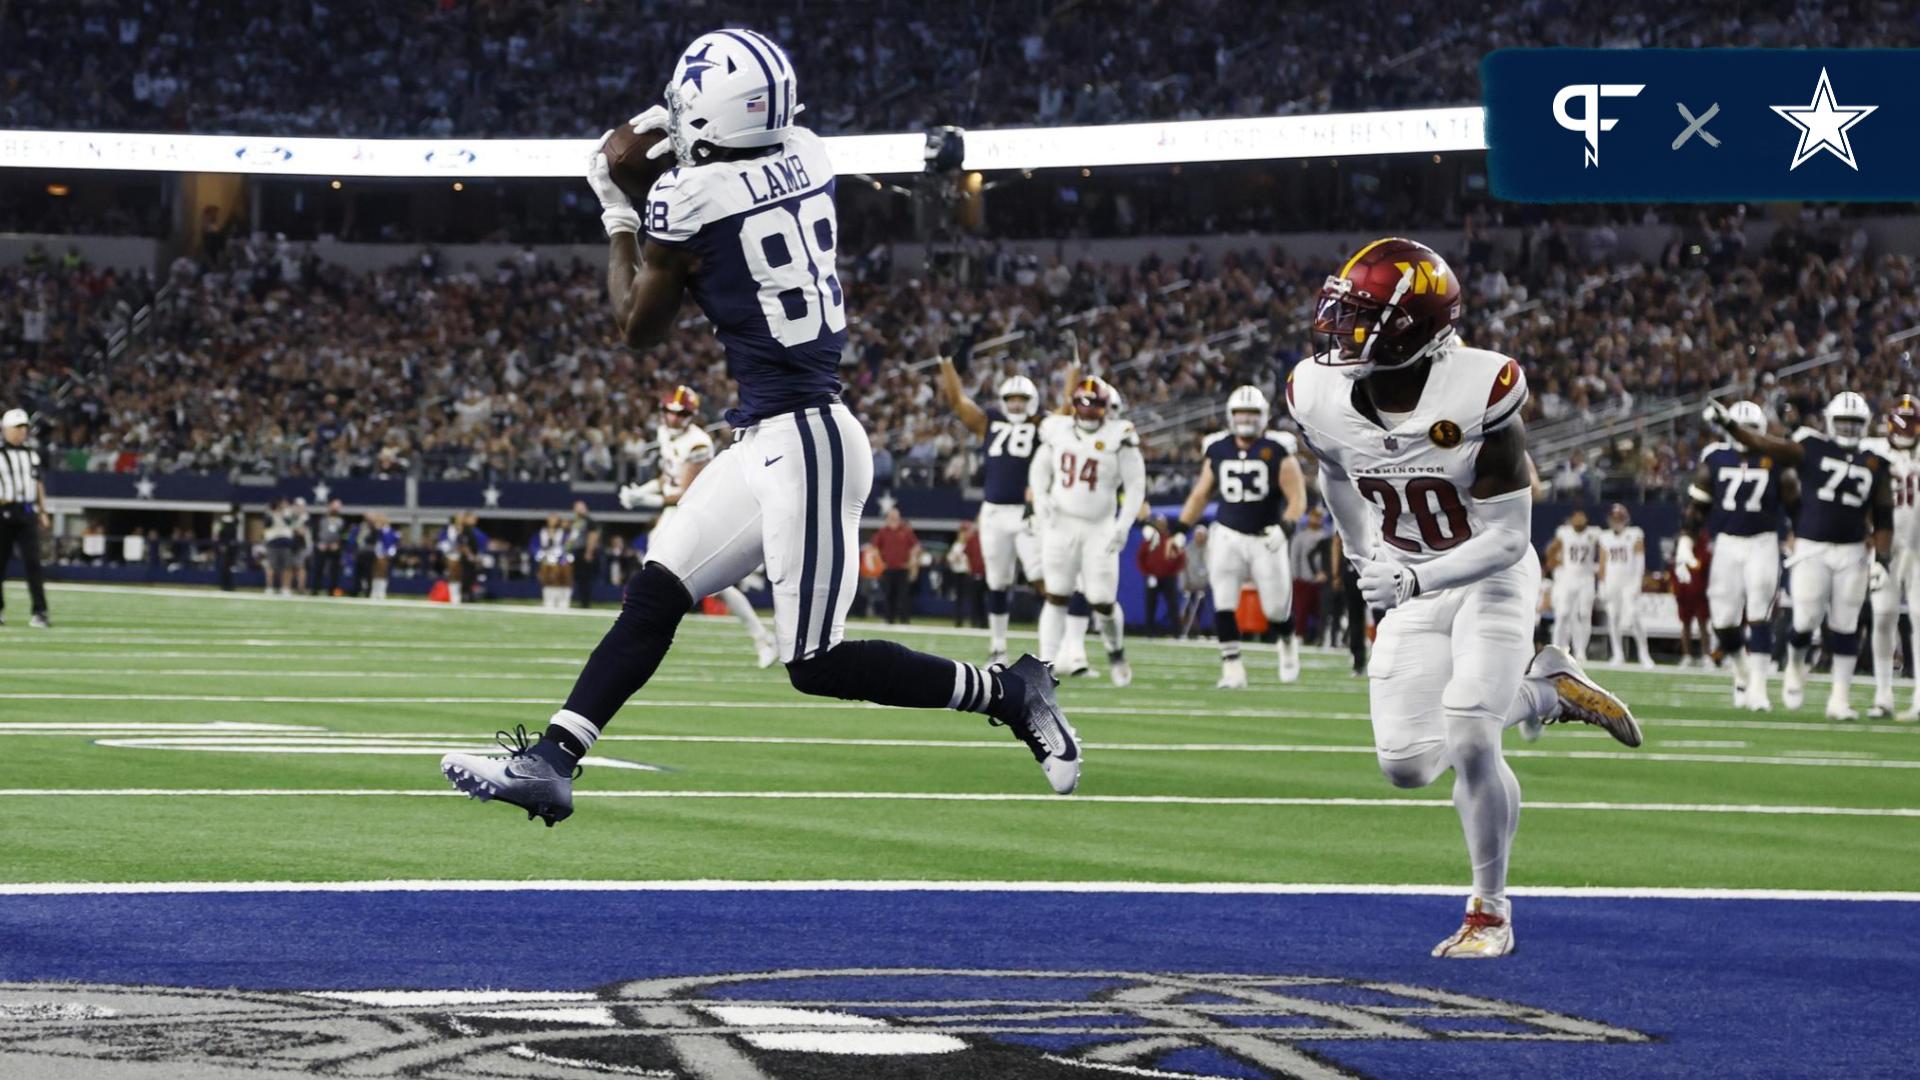 Dallas Cowboys wide receiver CeeDee Lamb (88) catches a touchdown pass against Washington Commanders safety Jartavius Martin (20) in the fourth quarter at AT&T Stadium.